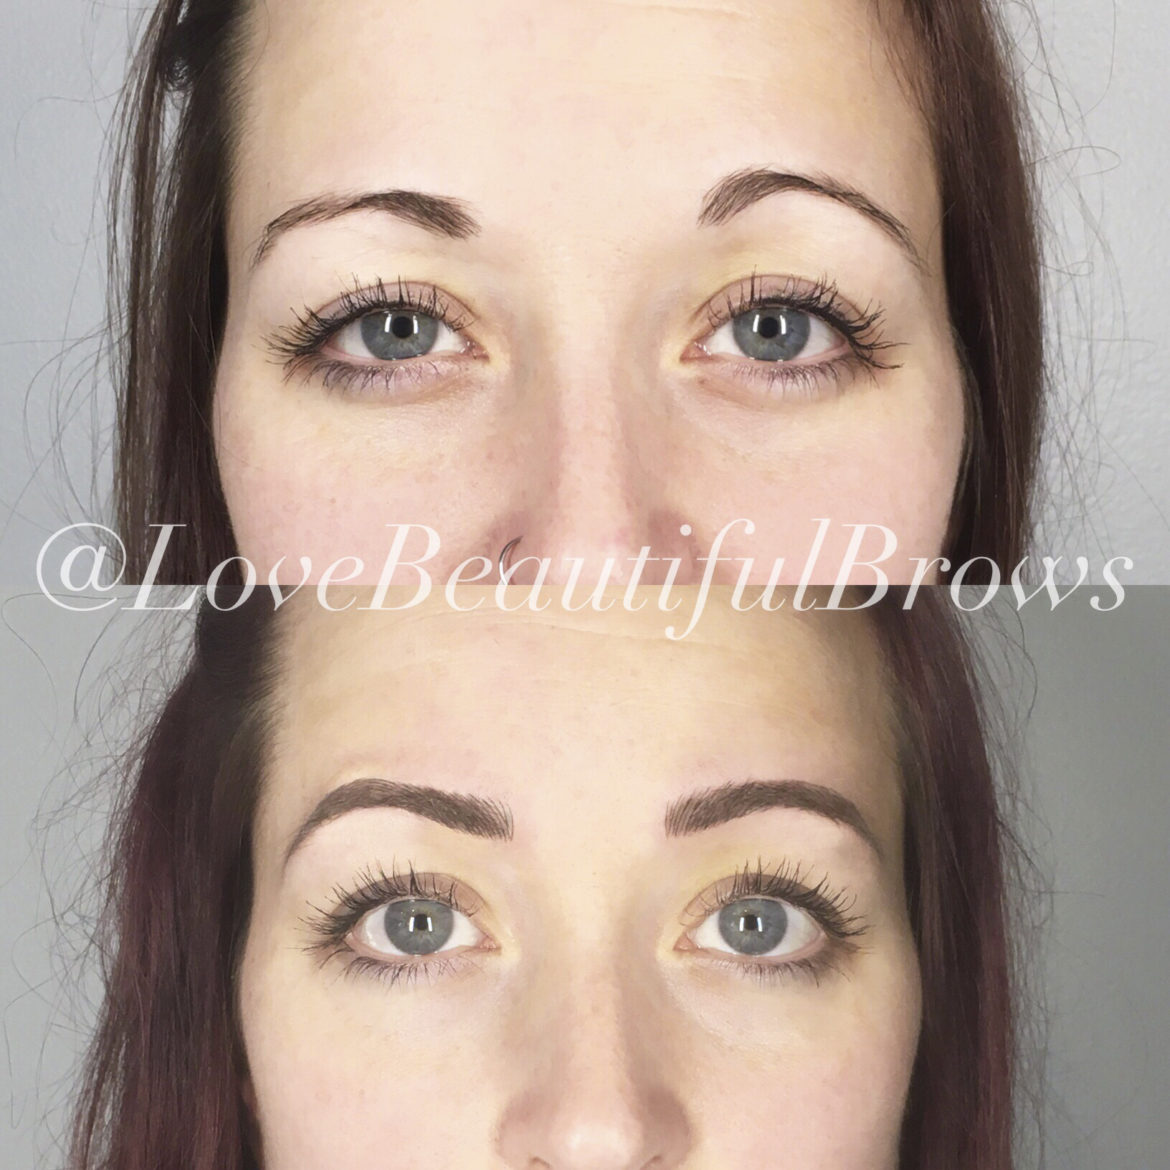 Microblading Services by Christina Freeman, Owner and Esthetician at Love Beautiful Skin, North Canton, Akron, Canton, Cleveland, Columbus, Ohio.